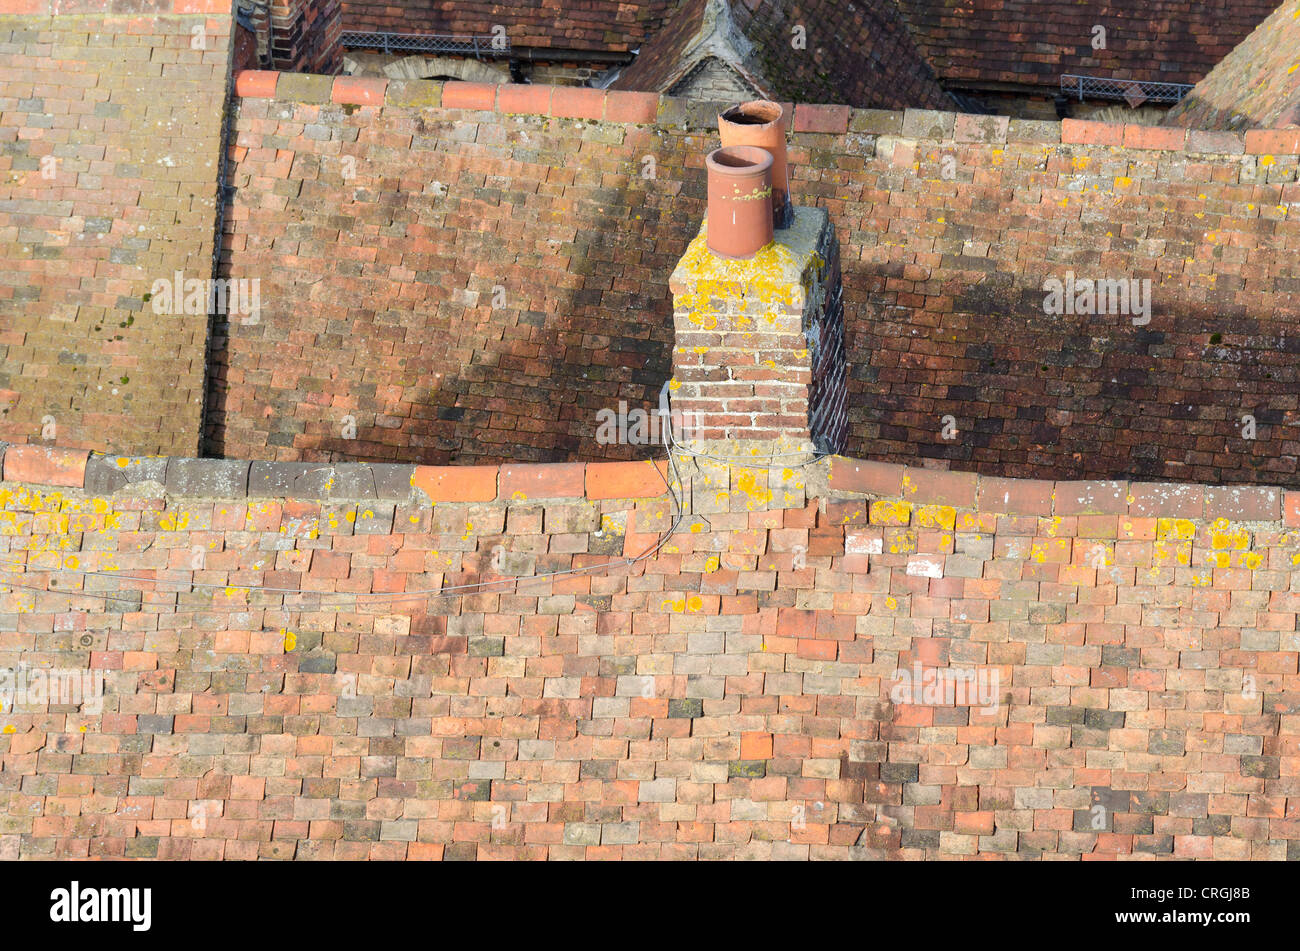 Traditional and original peg tiled roofs on buildings. Image taken in Rye, East Sussex, England, UK Stock Photo